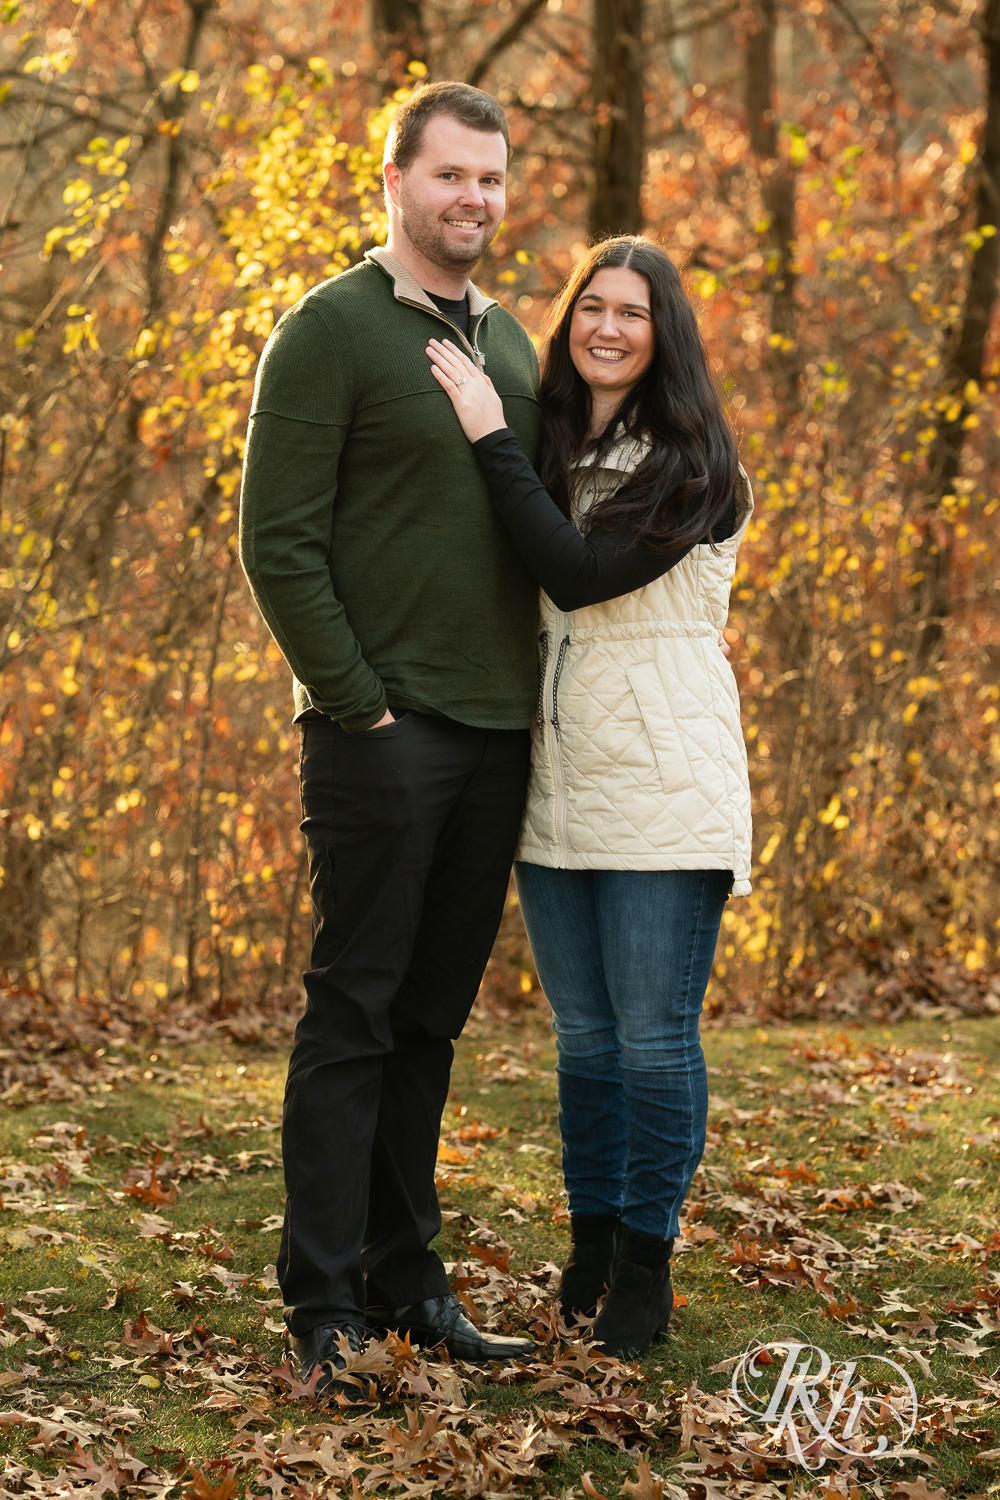 Man and woman smile at each other during chilly November engagement photography at Lebanon Hills in Eagan, Minnesota.